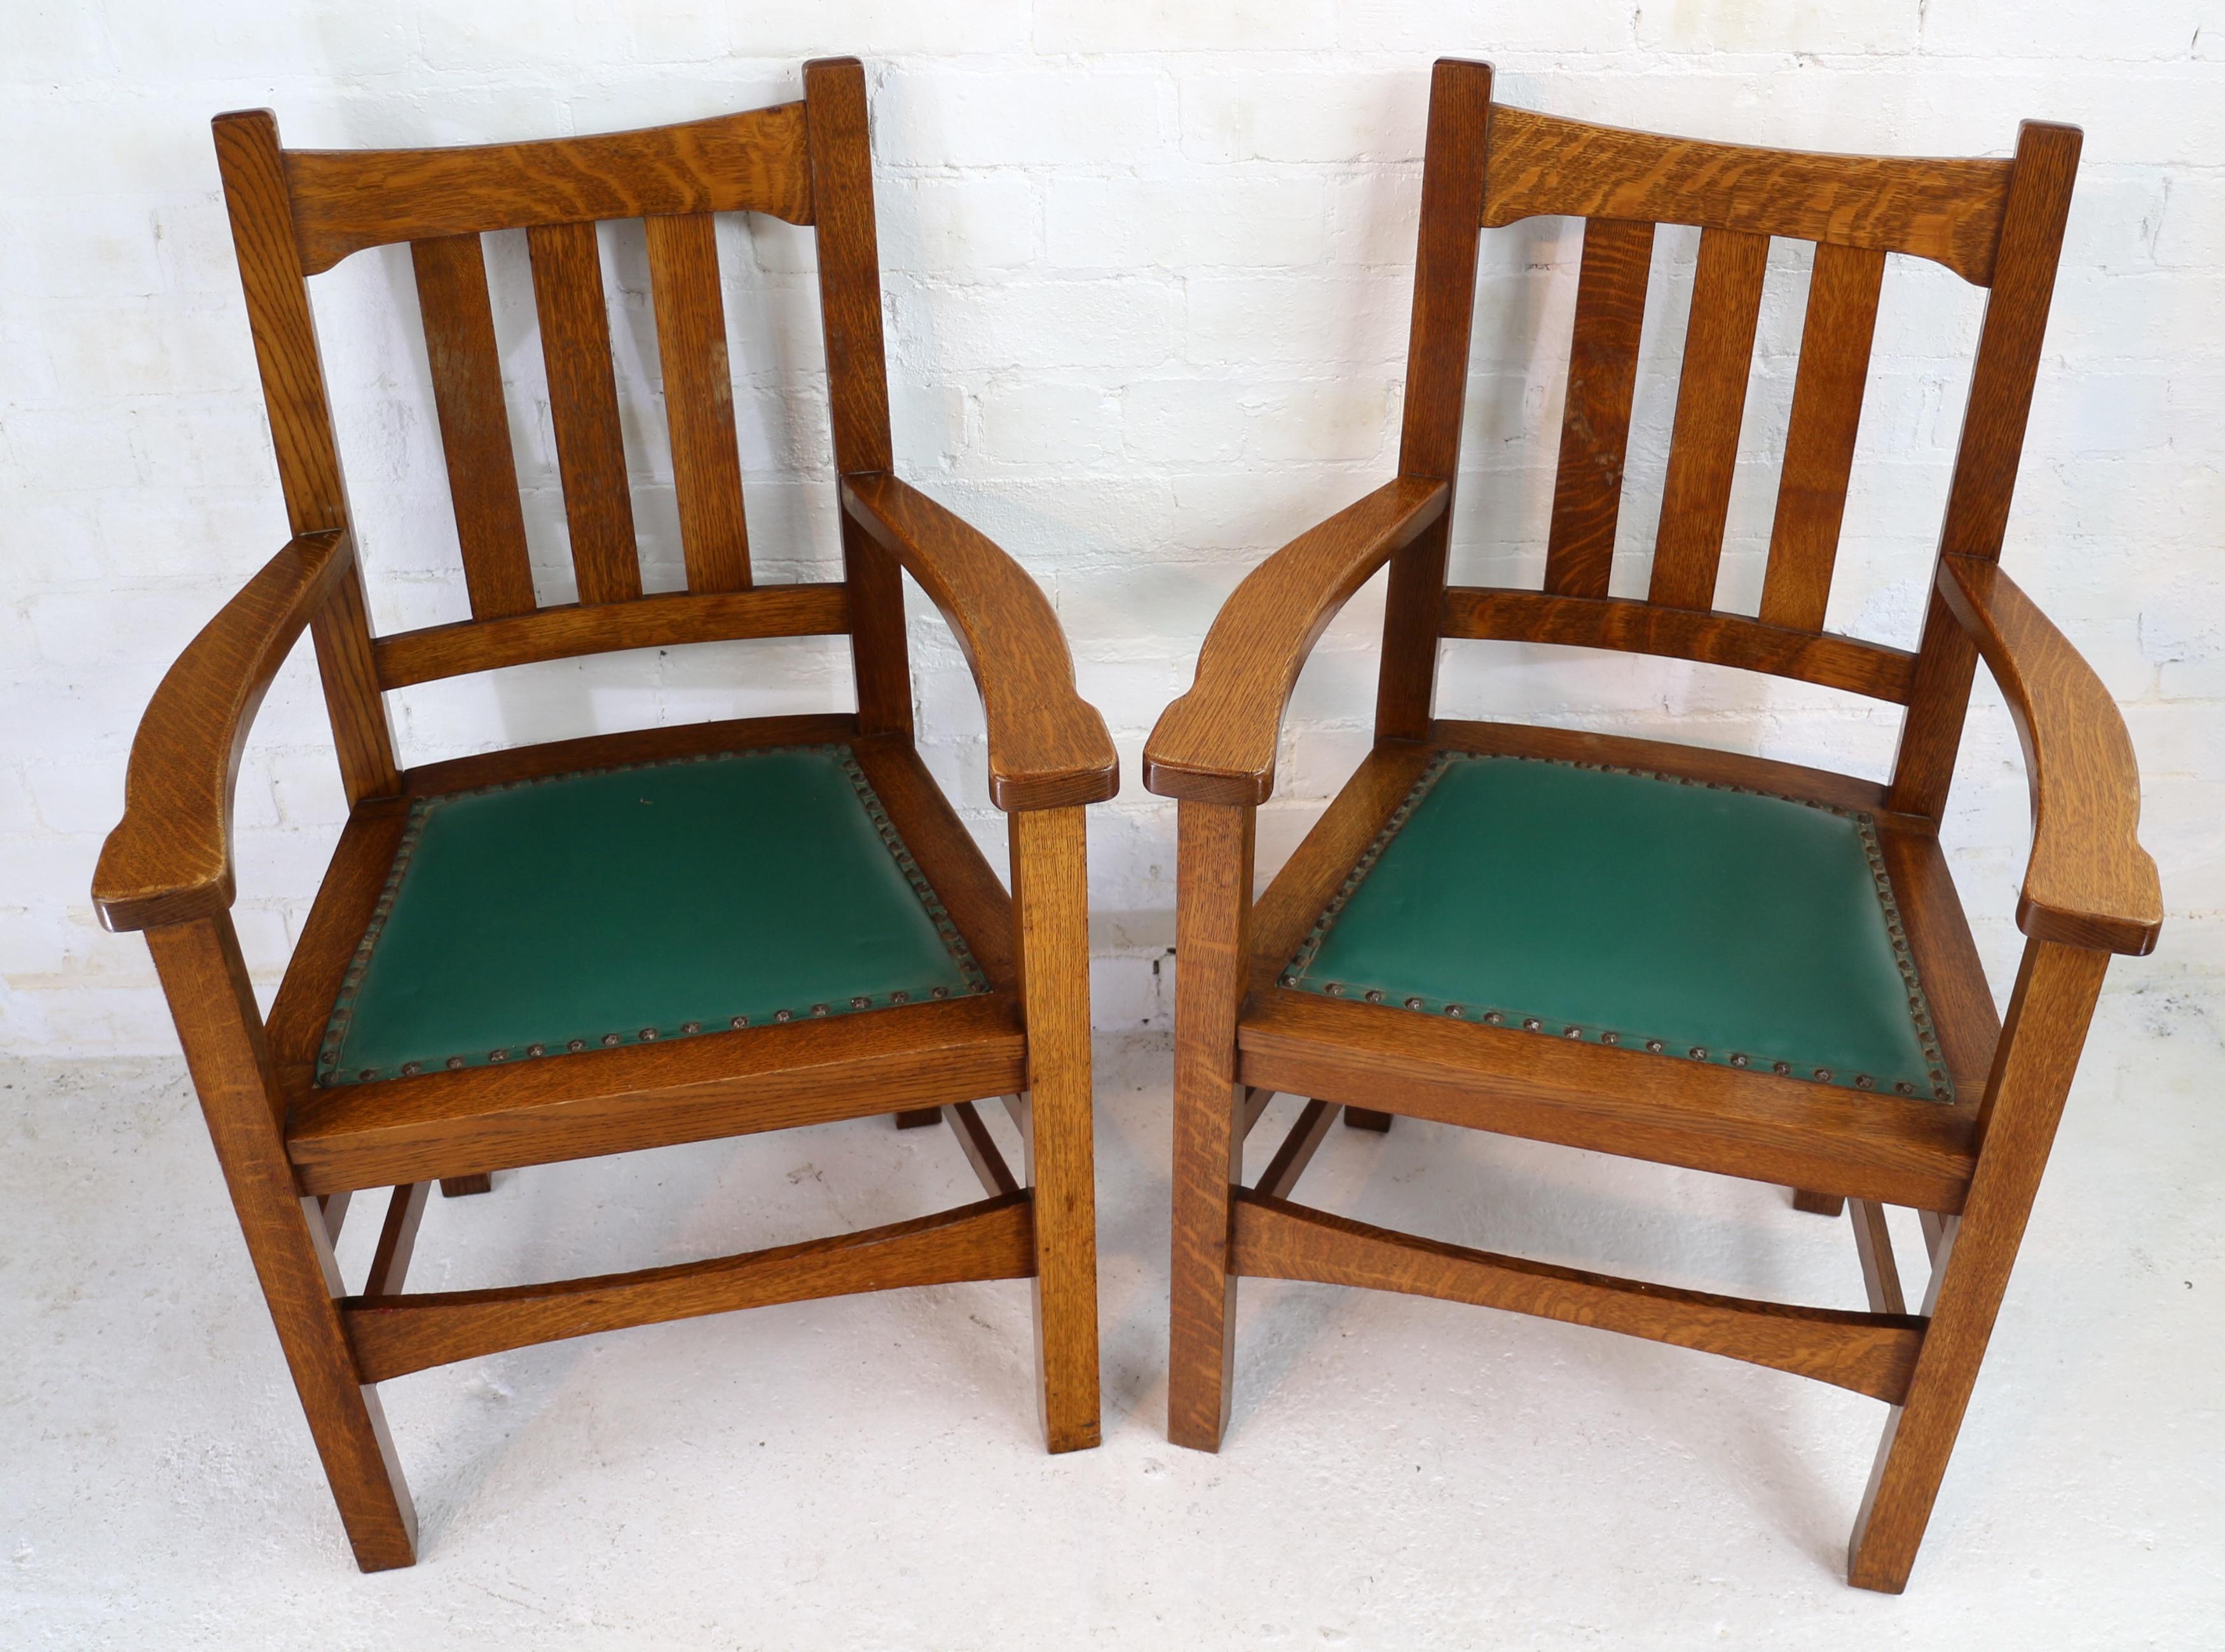 A rare set of eight Arts & Crafts Mission quarter-sawn oak dining chairs by Stickley Brothers and dating to circa 1900. Comprising two armchairs and 6 side chairs each with green pad seats with a hammered finish to the studs. With brass Quaint